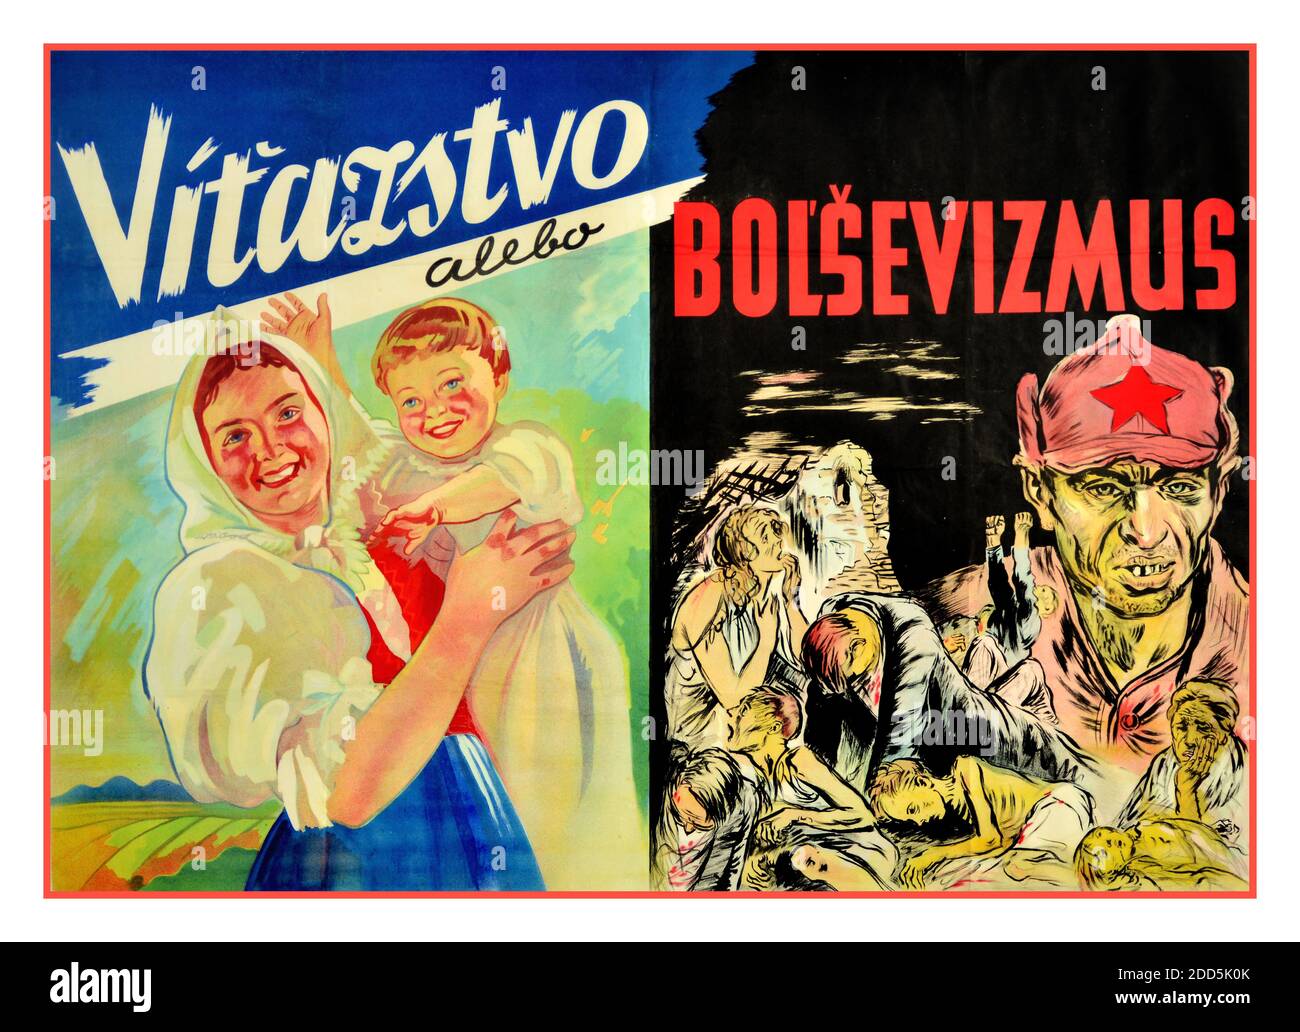 Vintage Nazi WW2 Propaganda Poster issued during the Second World War in the Slovak Republic -“ Vitazstvo Albo Bolsevizmus”   ‘Victory or Bolshevism’. Poster split in two parts - left shows smiling mother and child captioned ‘Victory’ above The right side shows destroyed village with Red Army soldier & hat with red star and captioned Bolshevism above. (Operation Barbarossa) Goebbels Propaganda Minister Stock Photo